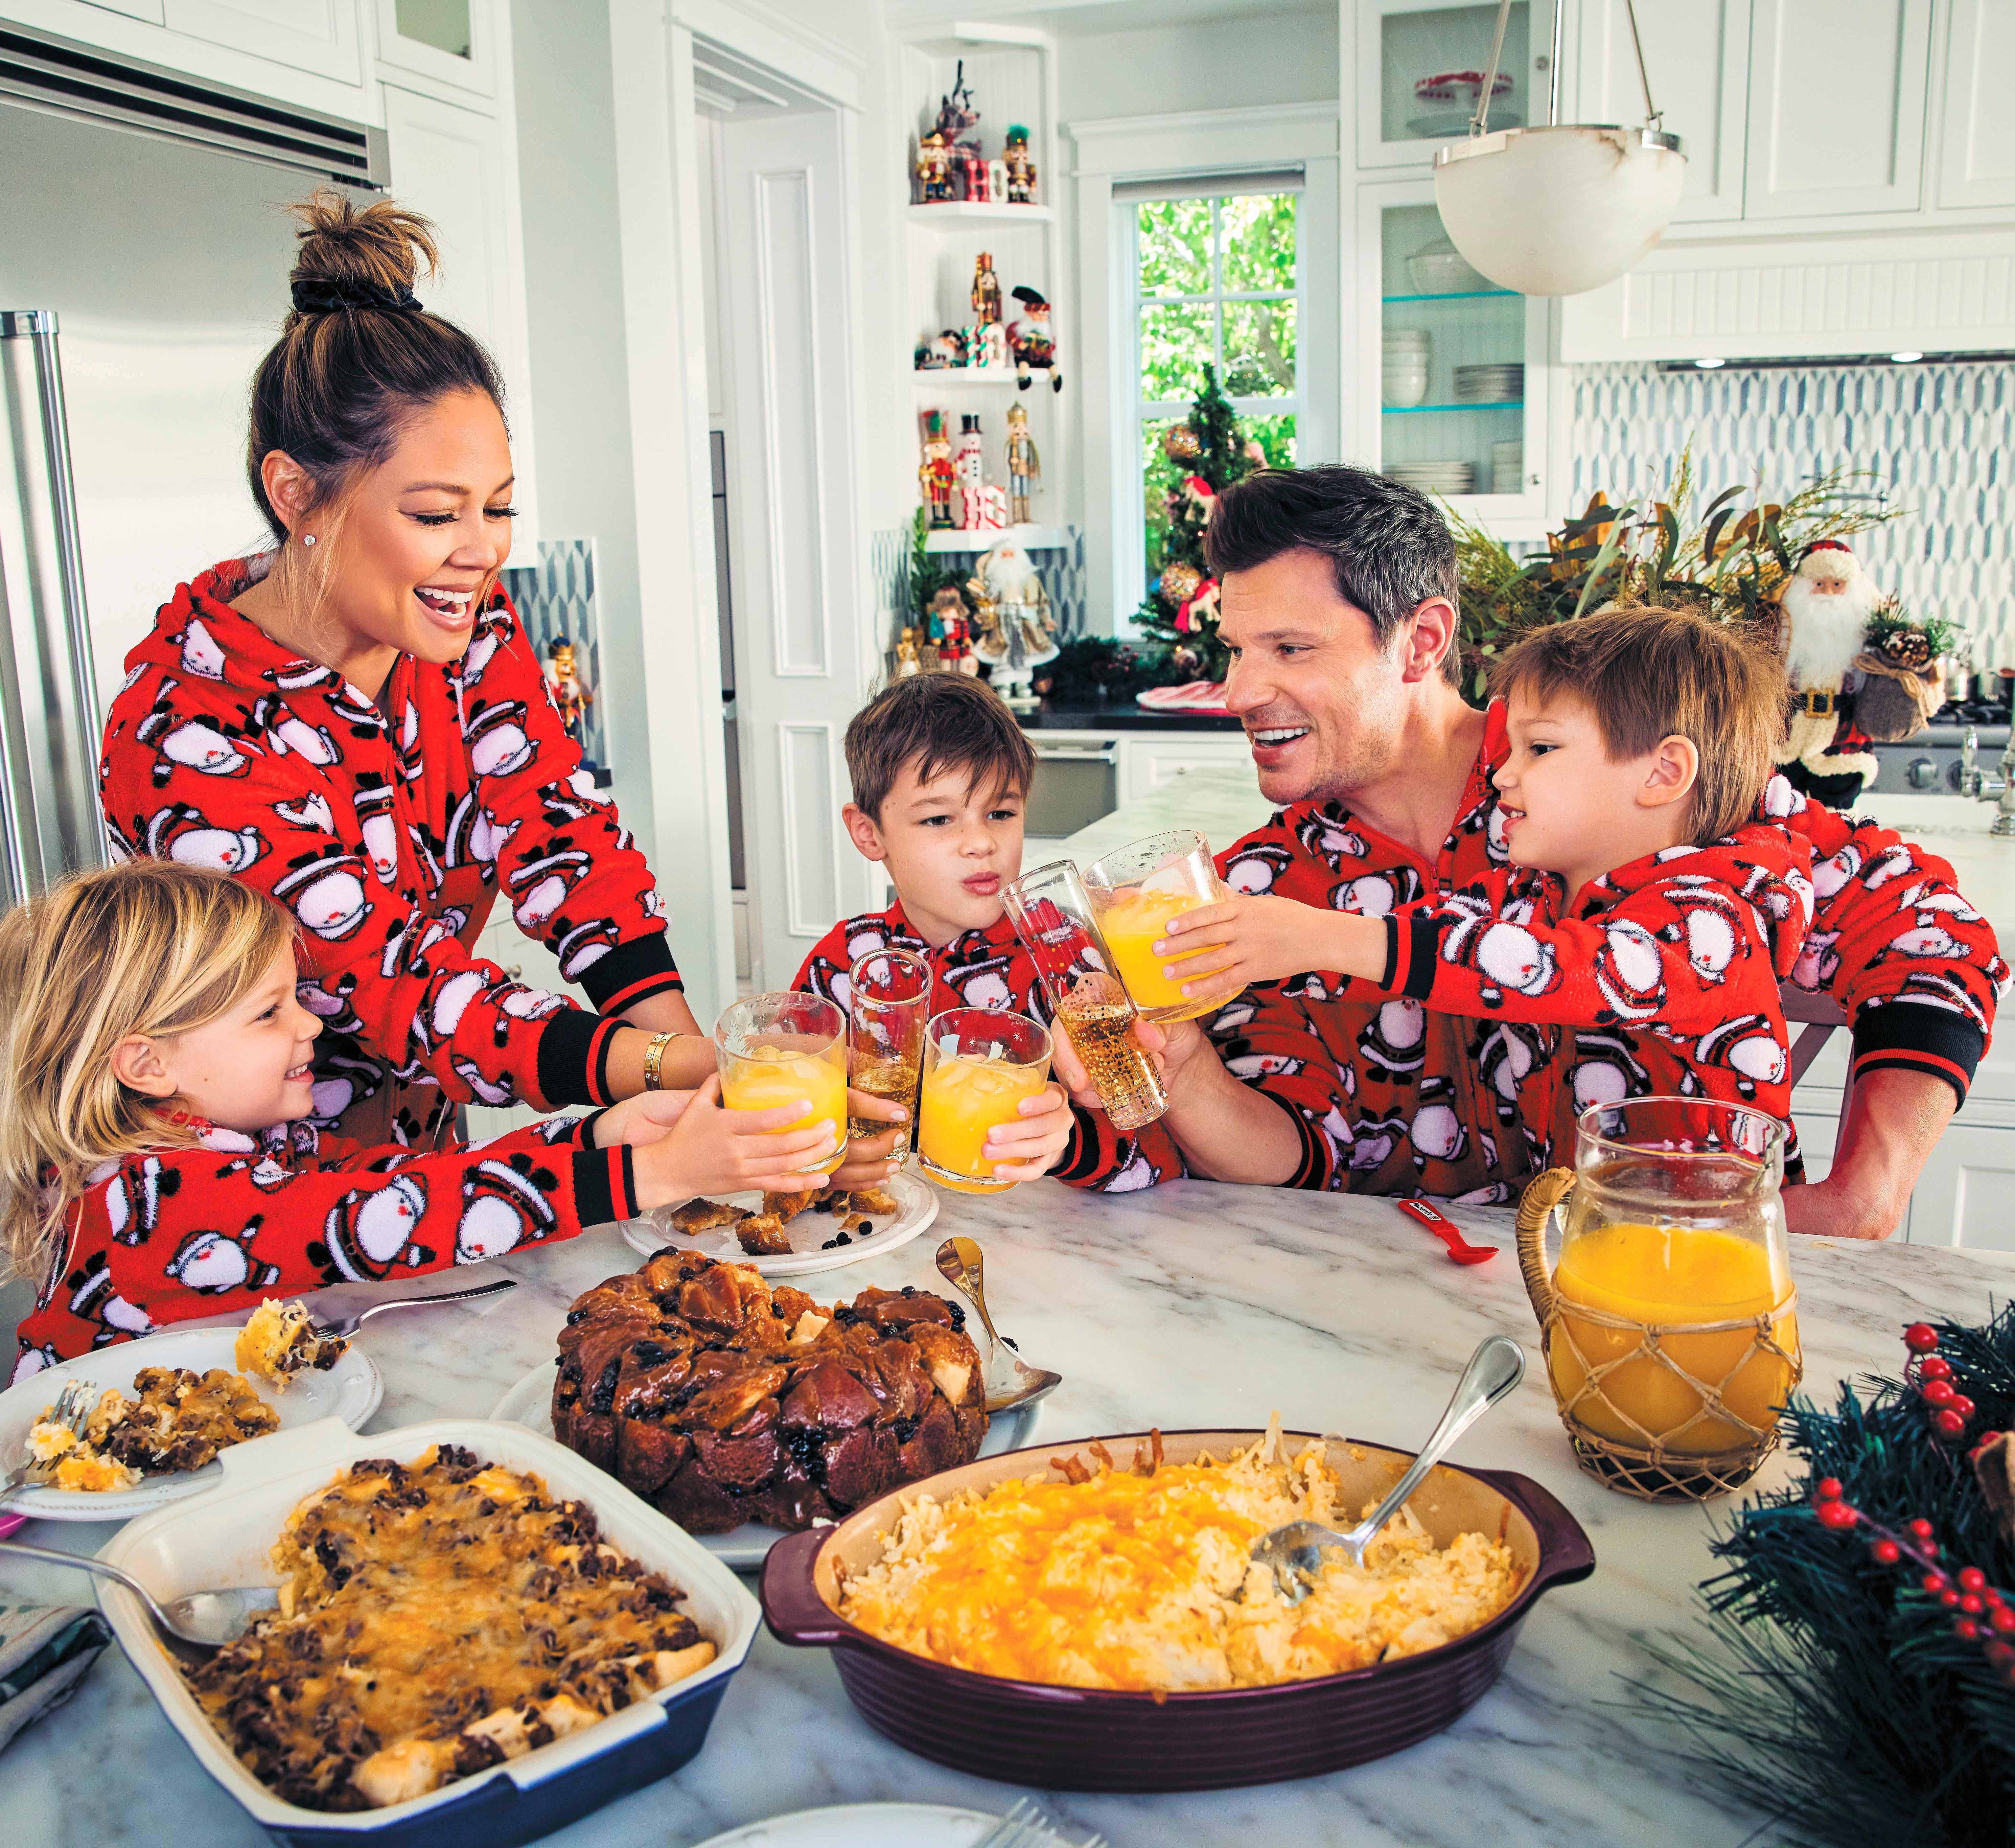 Vanessa Lachey with her three children and her husband holding cups with beverages.